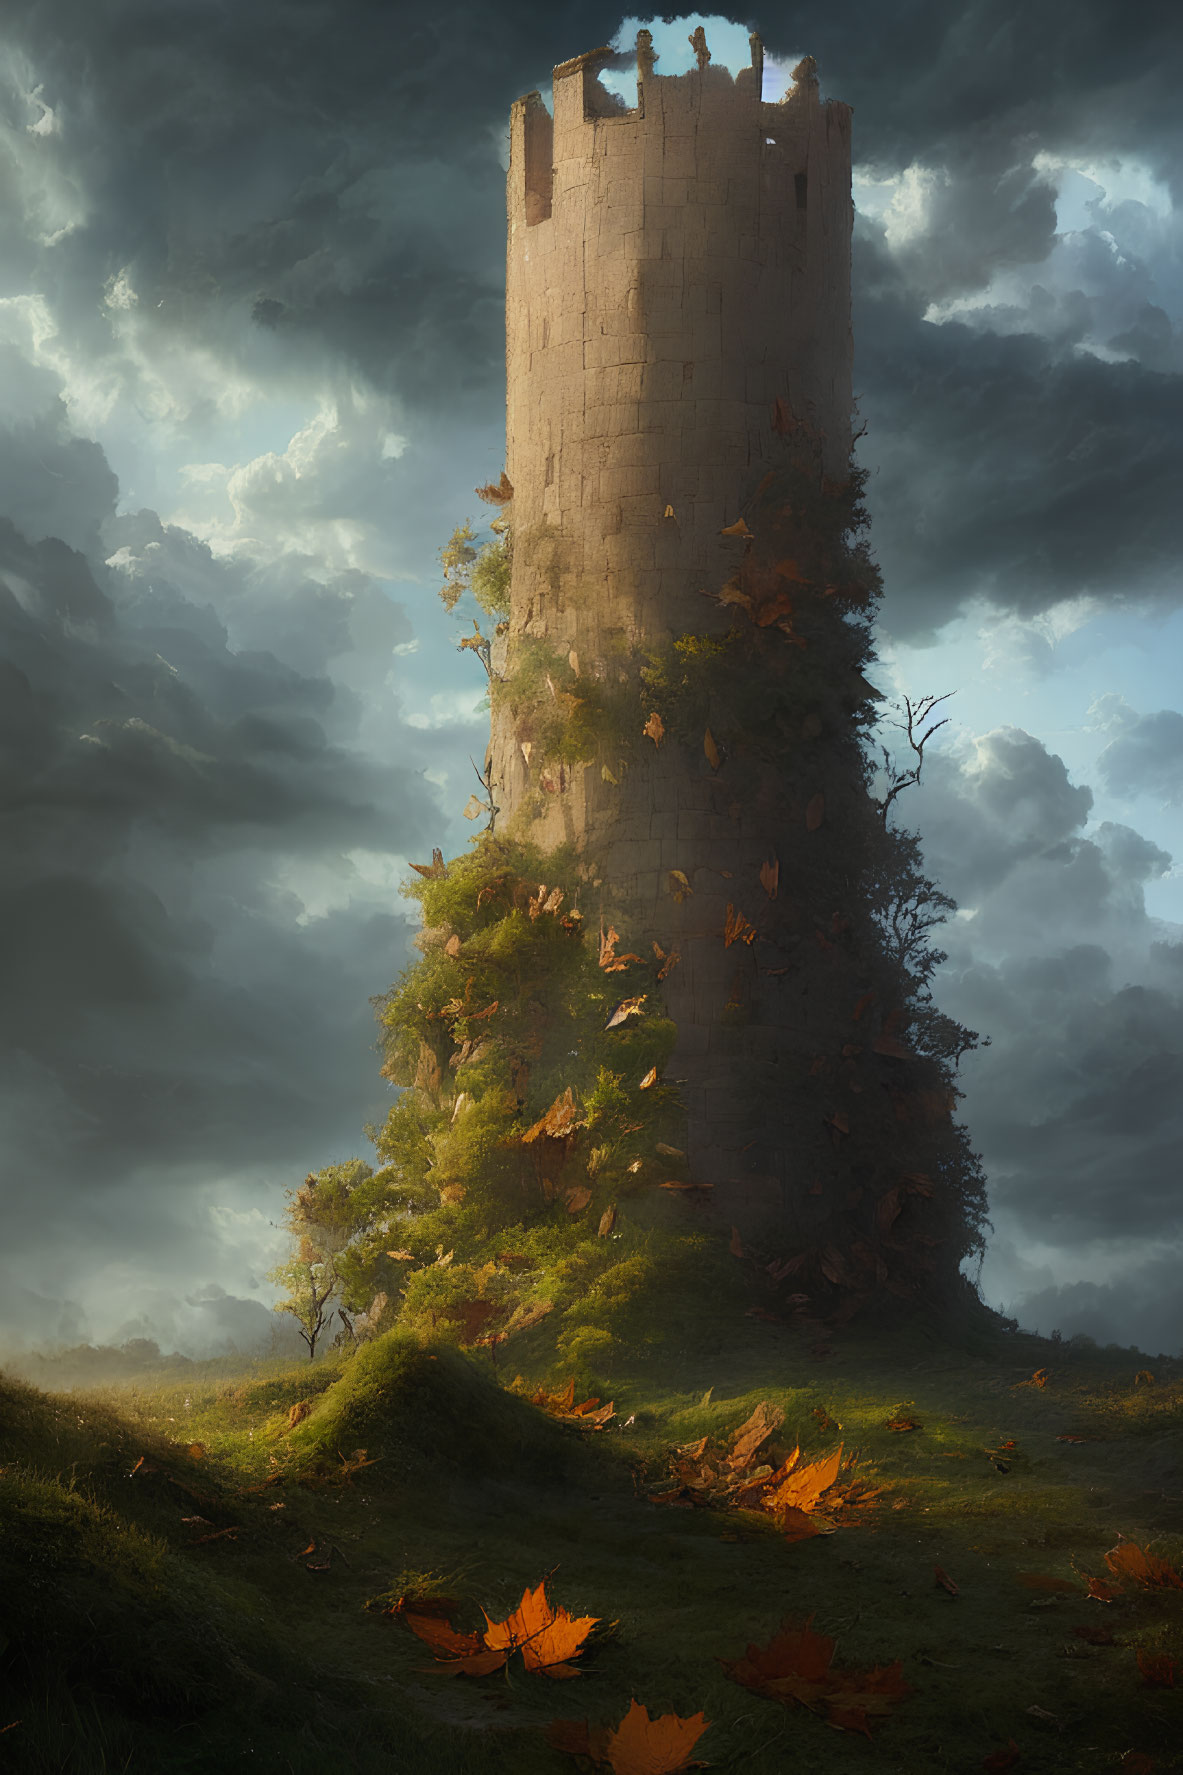 Solitary Stone Tower in Autumn Foliage Under Dramatic Sky